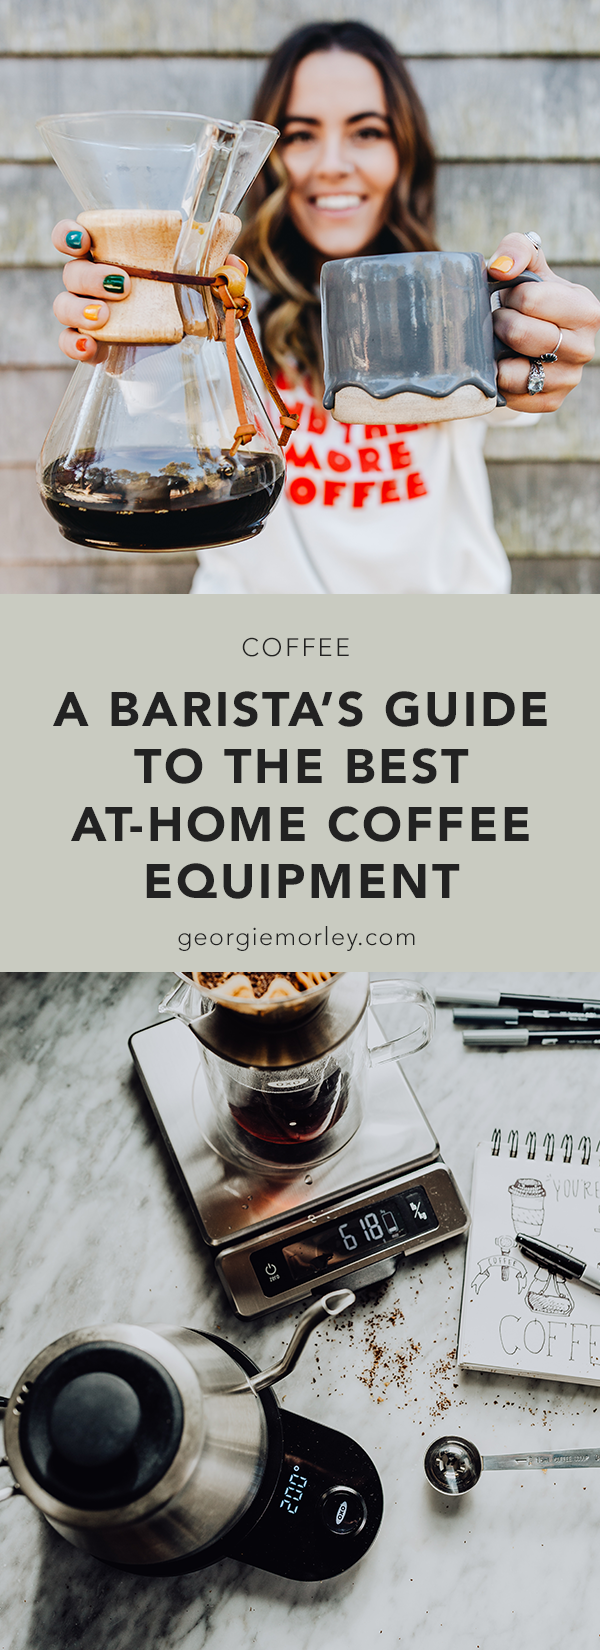 A Barista’s Guide to the Best At-Home Coffee Equipment